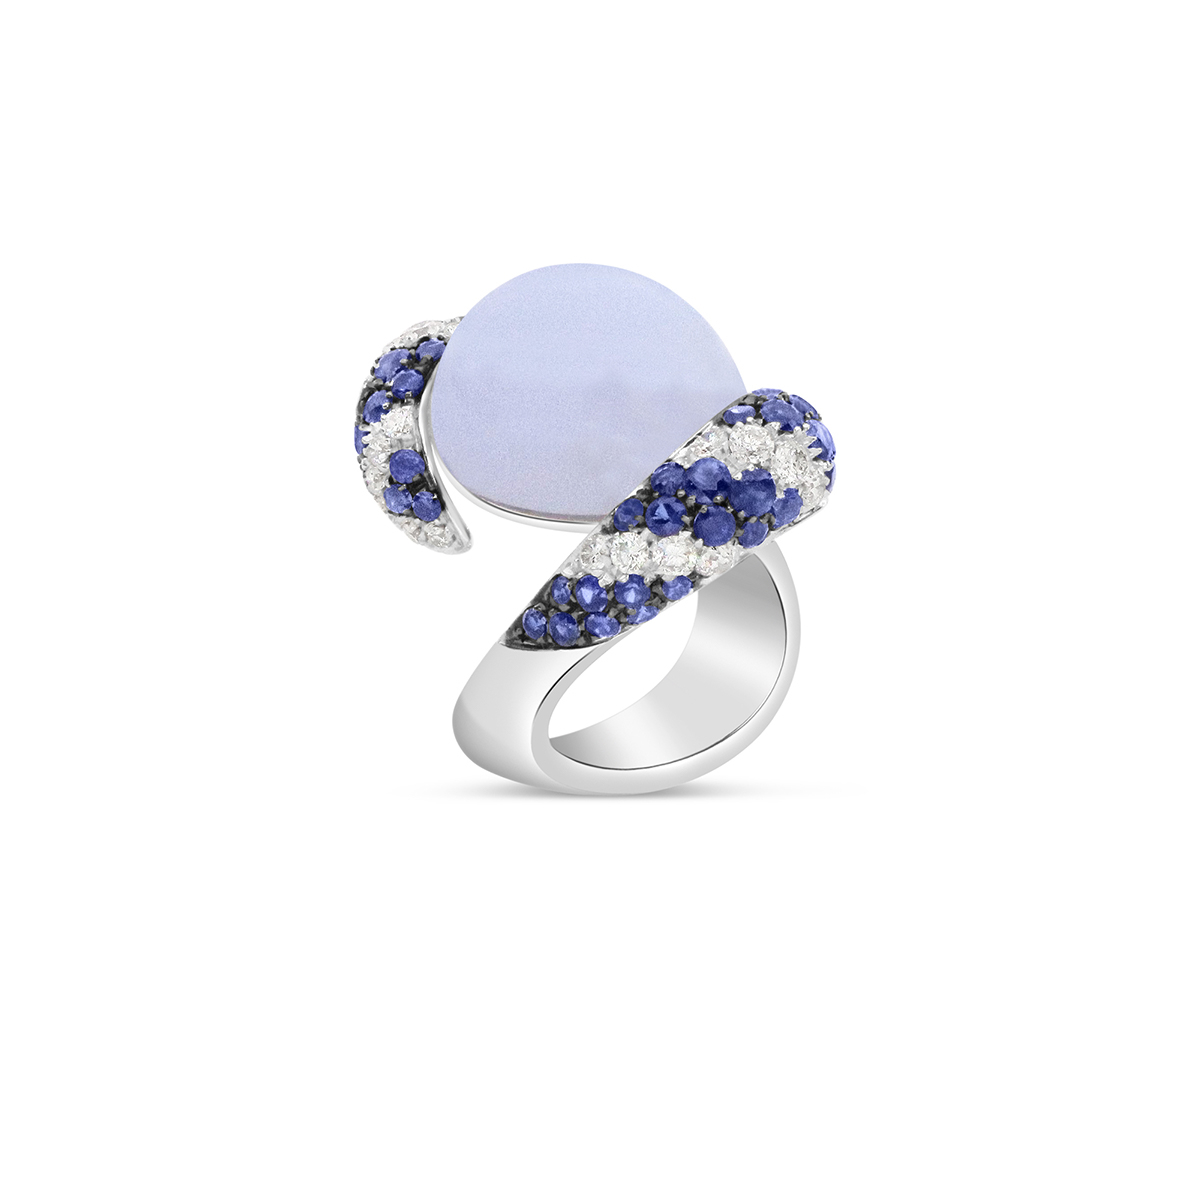 Chalcedony and blue sapphires ring in 18kt white gold